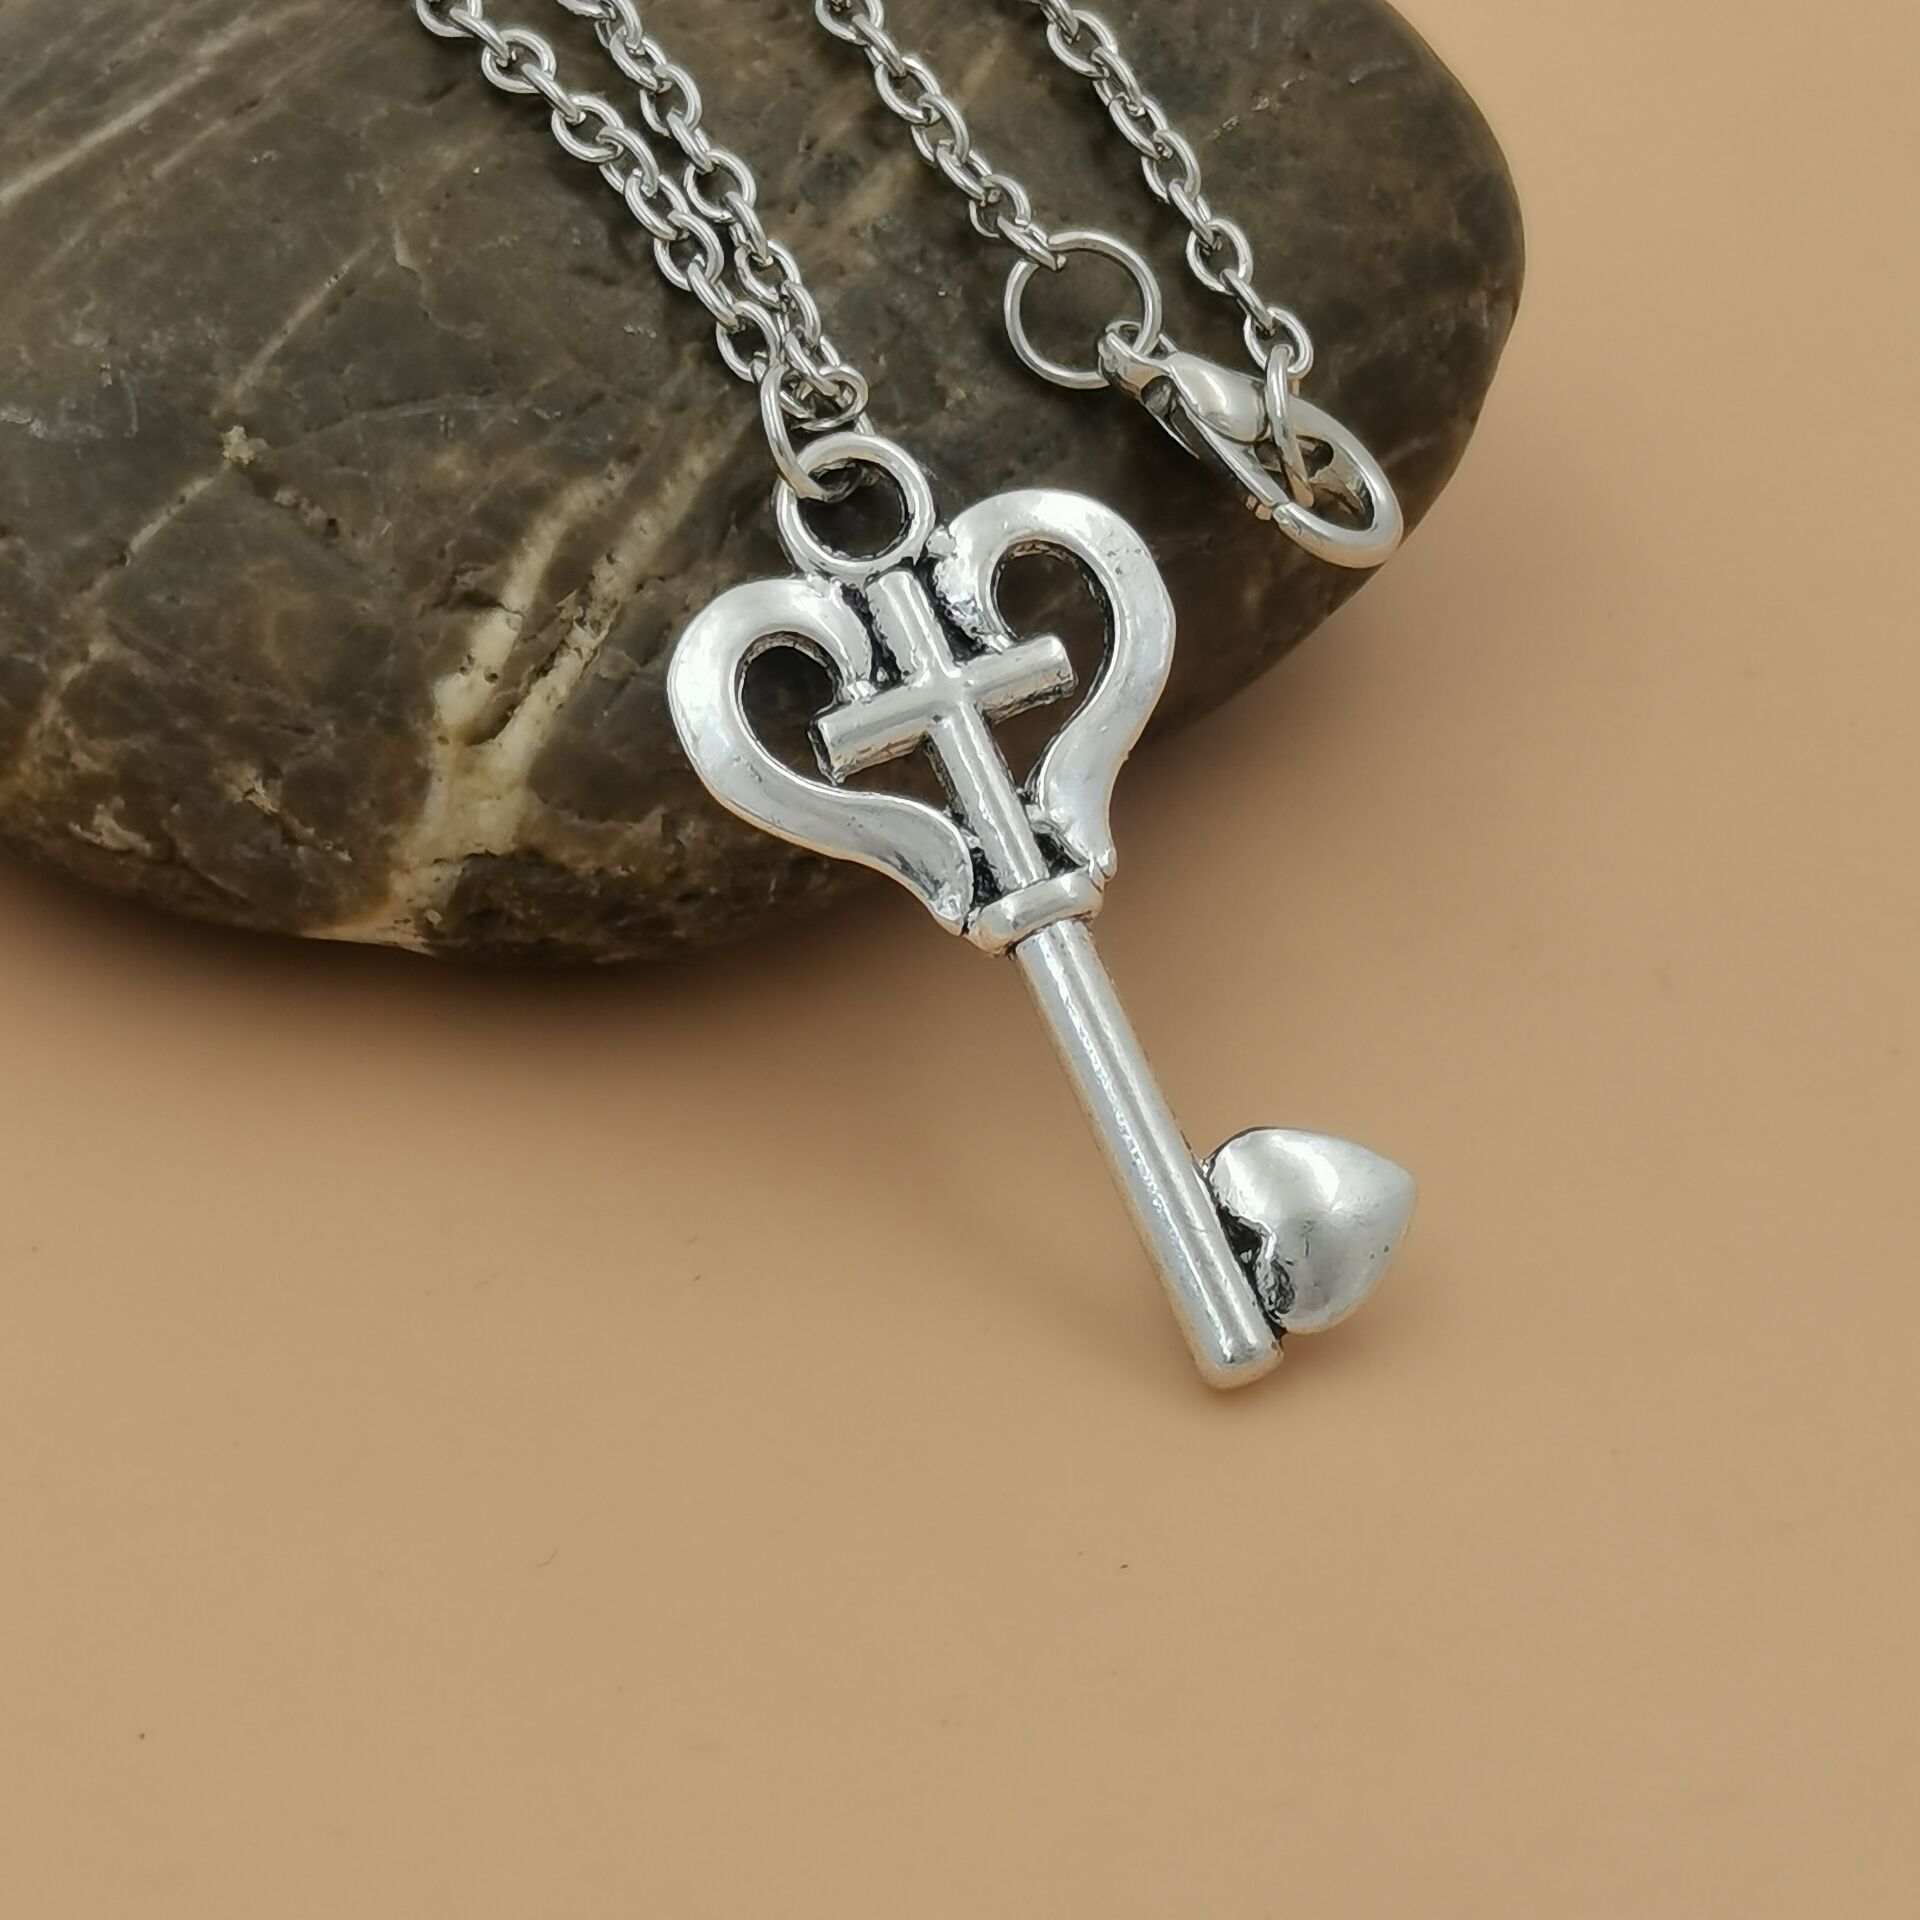 Alloy Antique Silver Fashion key Pendant Necklace For Men & Womens Jewelry Accessories A-860d